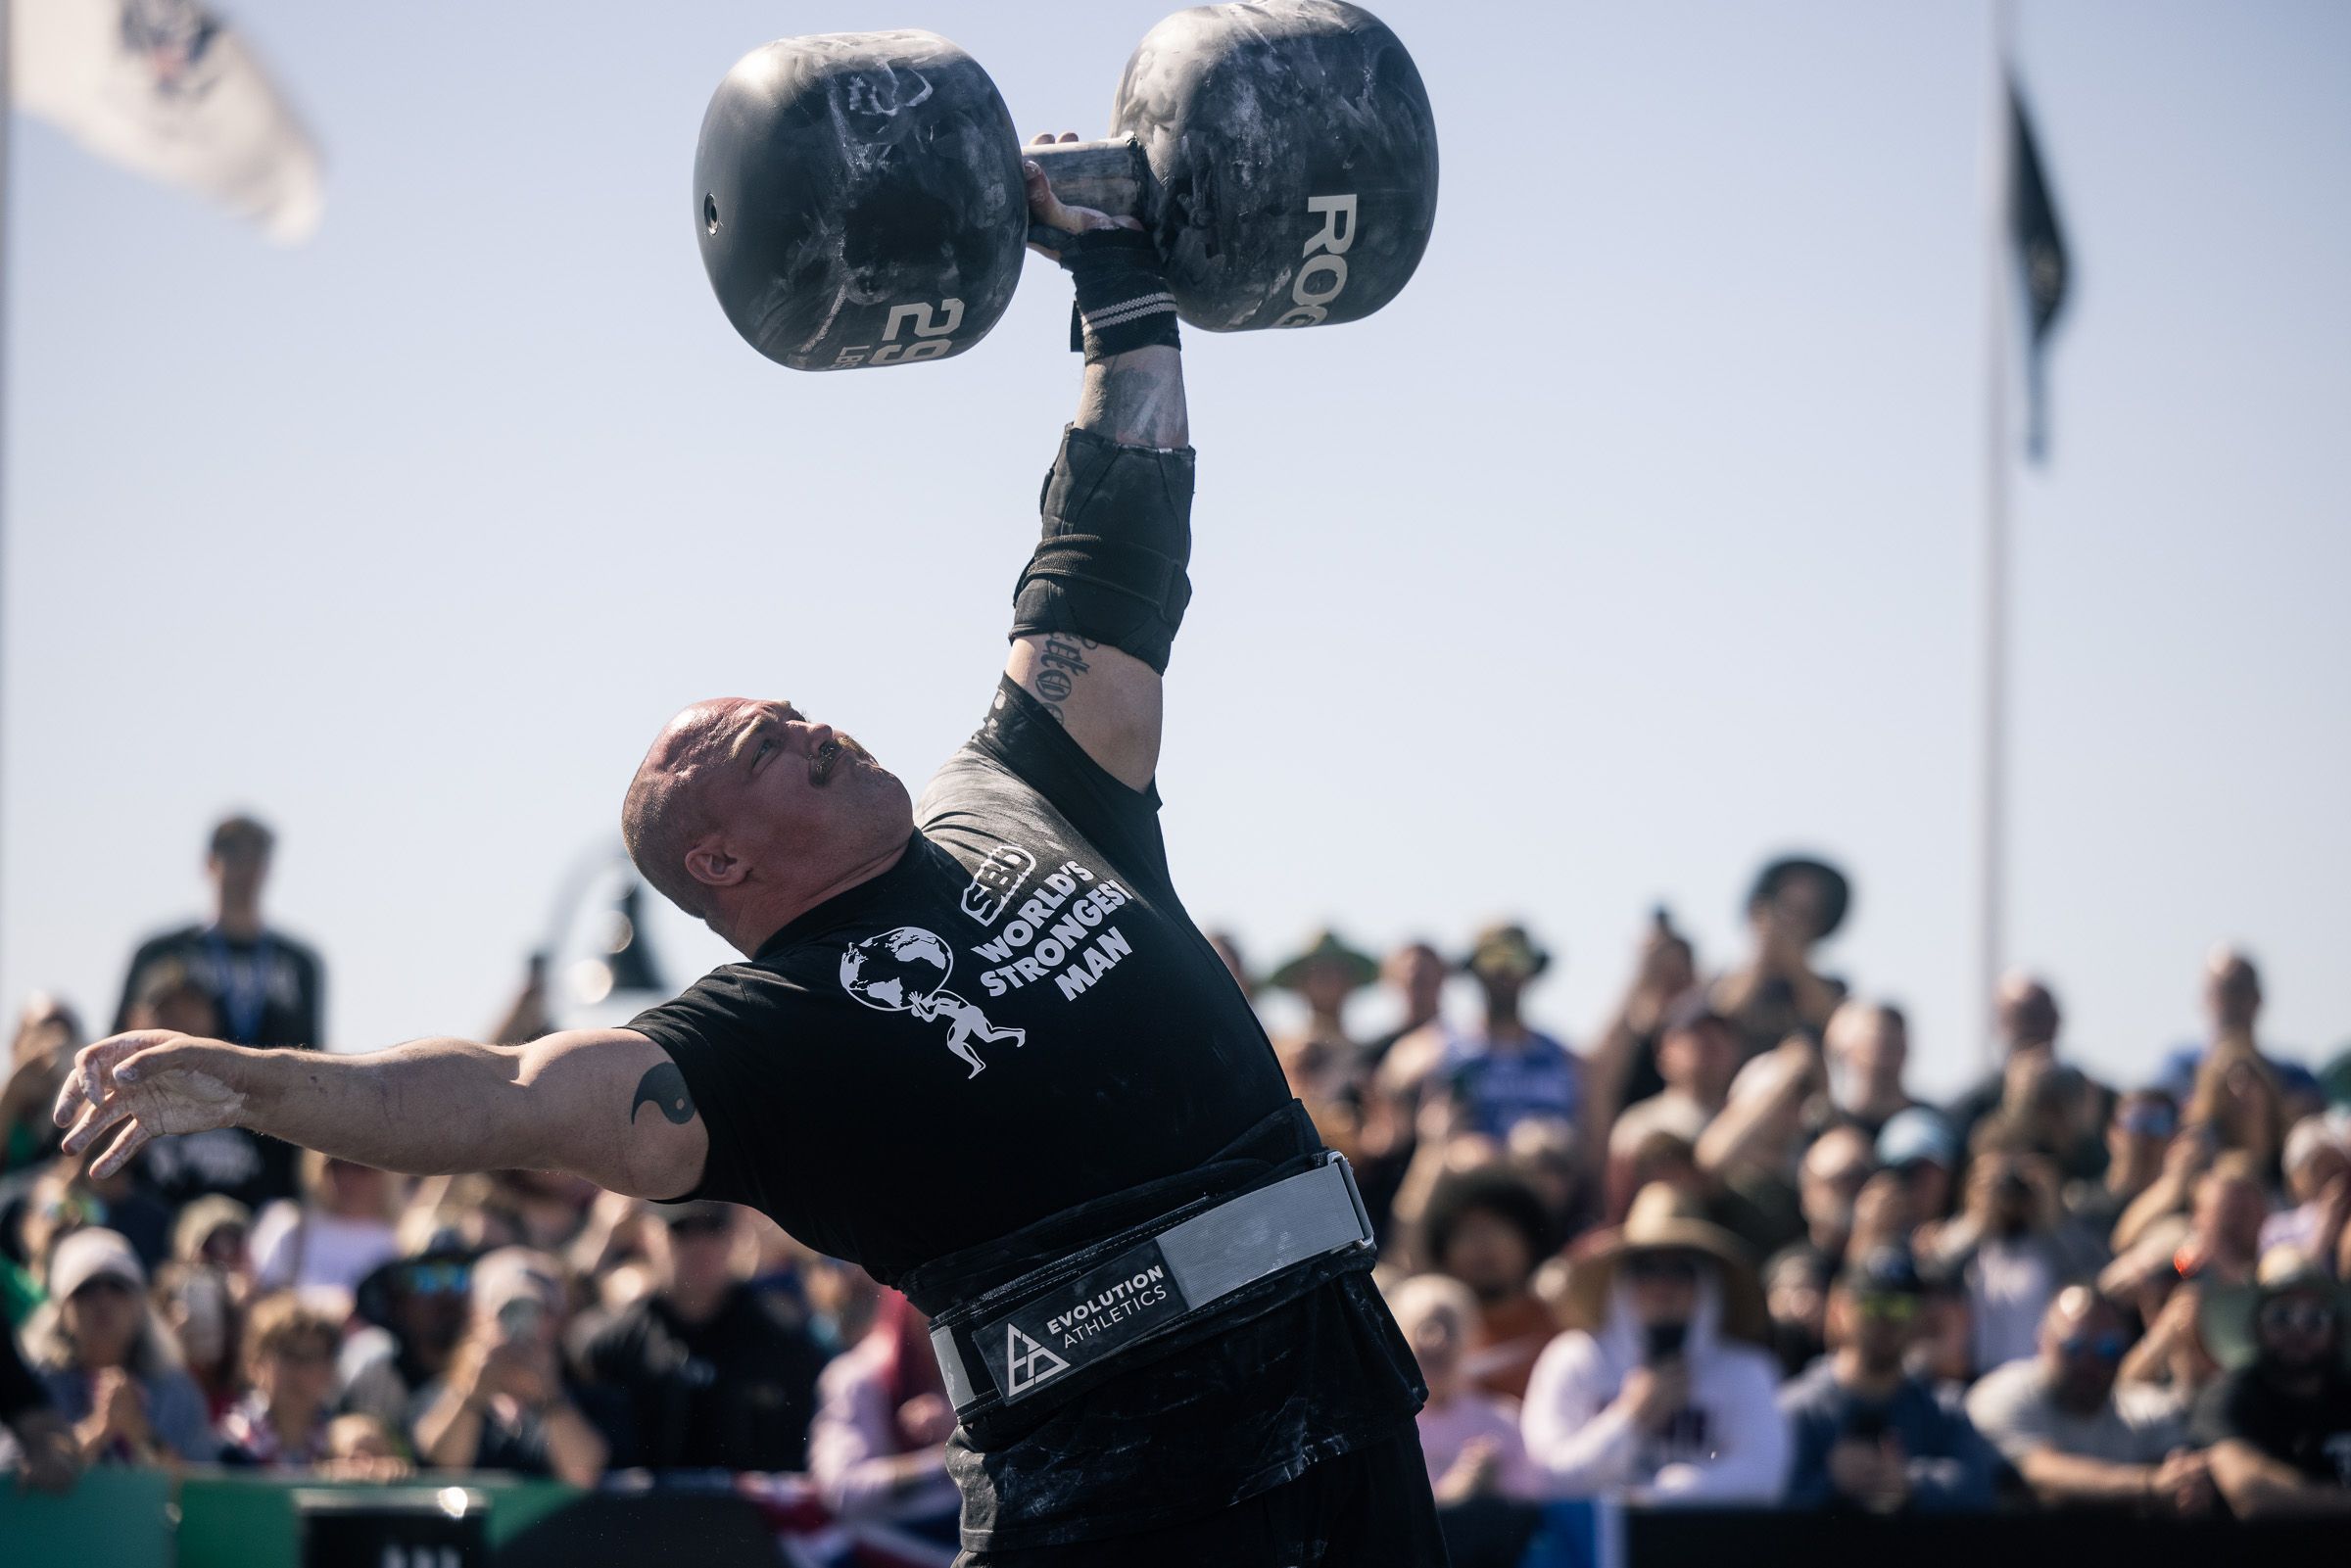 Who's the World's Strongest Man? We Rank the 10 Strongest Men of All Time -  Men's Journal